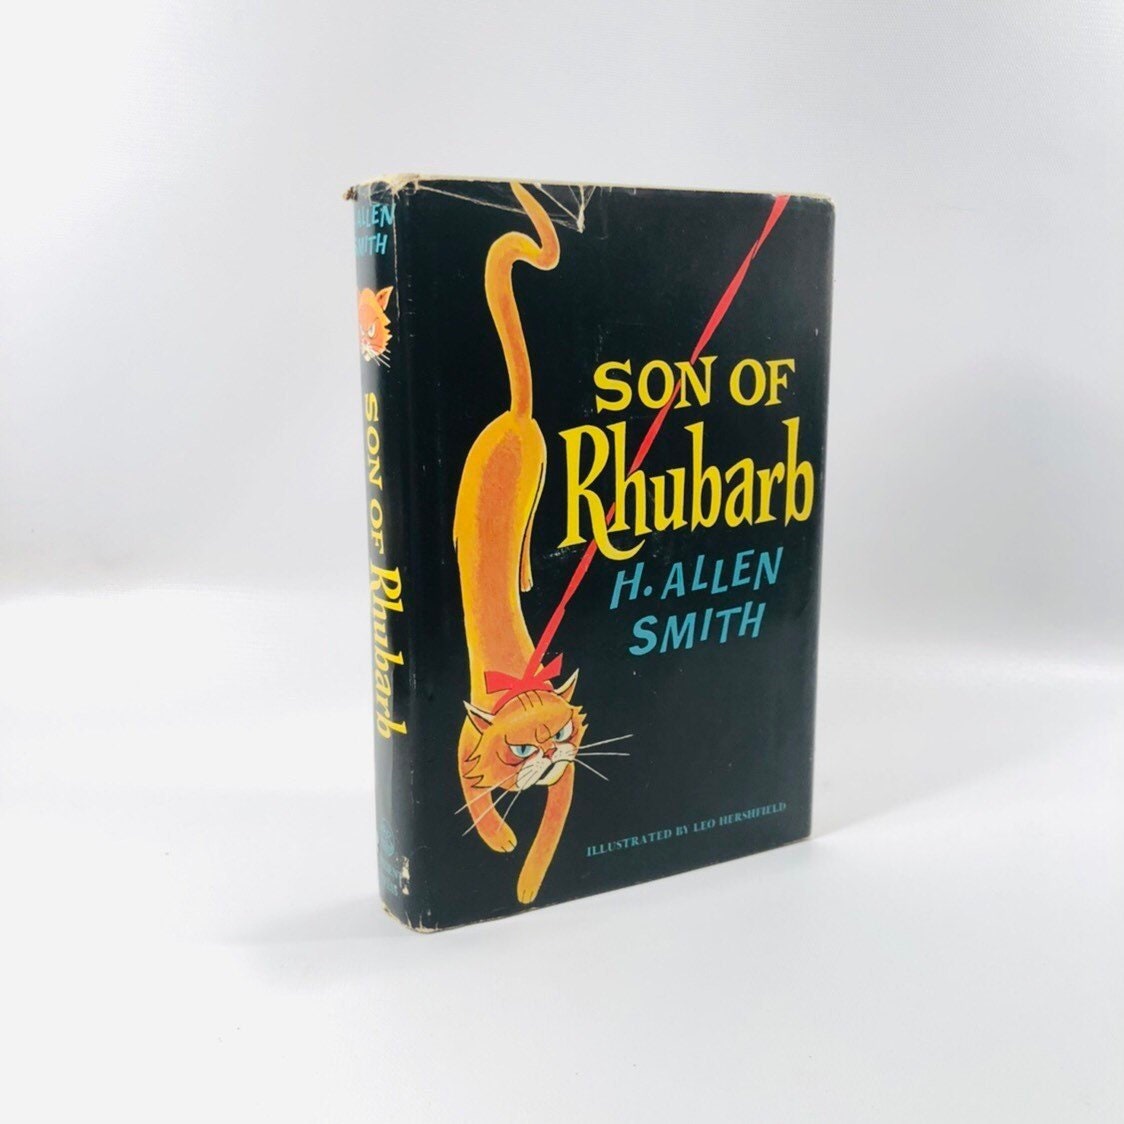 Son of Rhubard by H. Allen Smith 1967 A Vintage Book Vintage Book